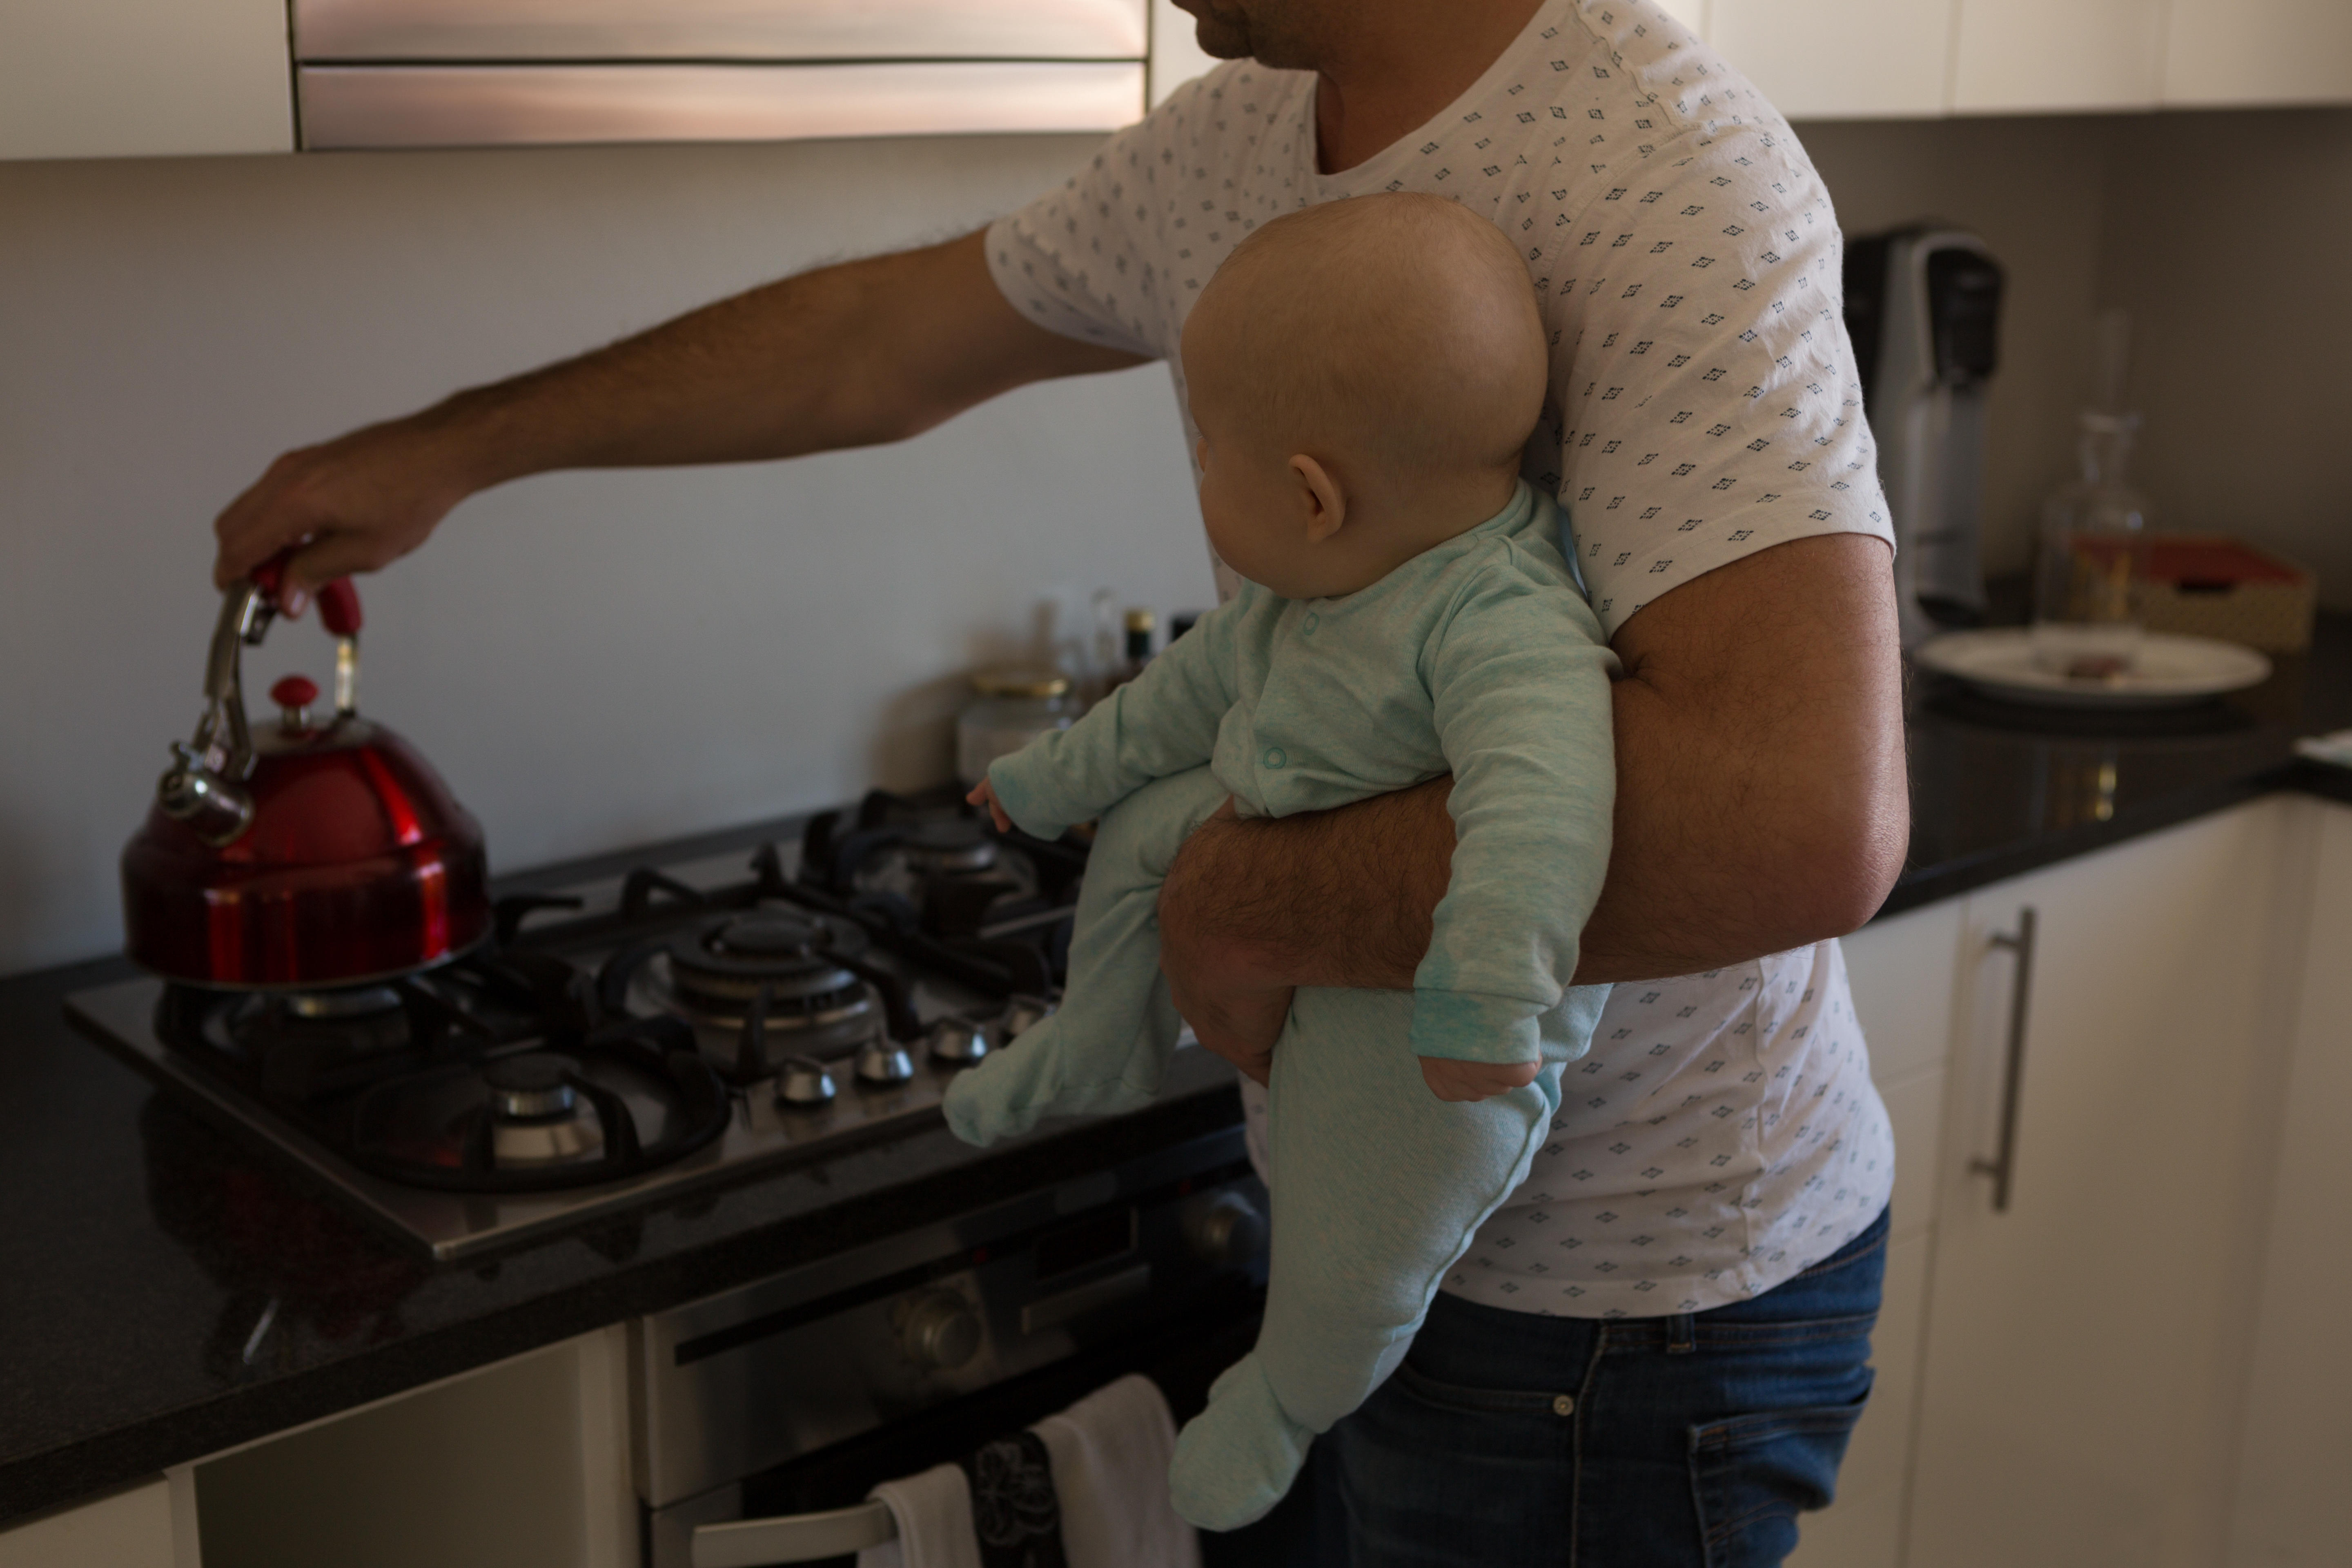 Father and baby boy preparing coffee in kitchen